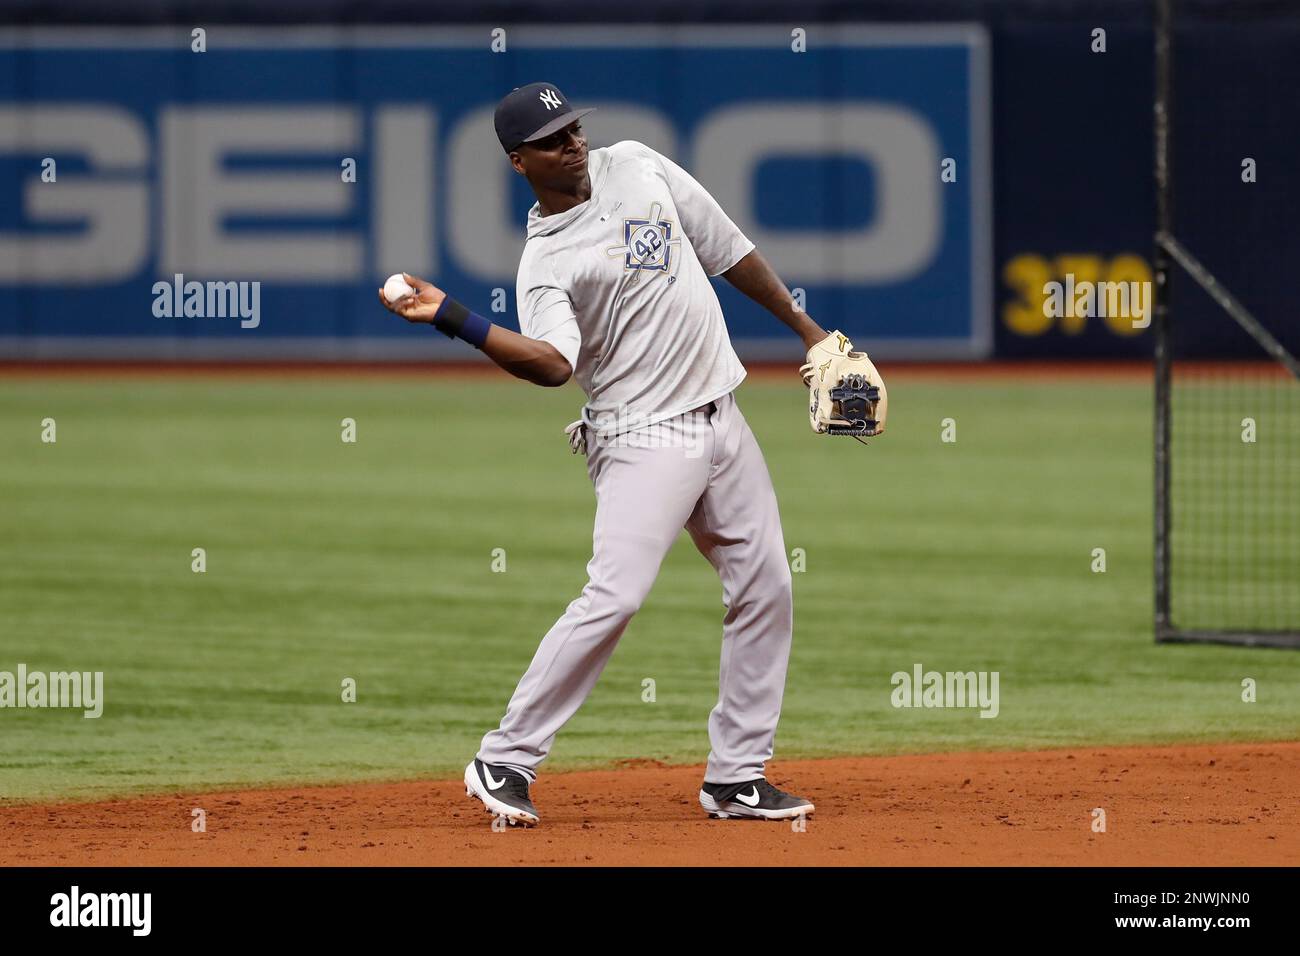 ST. PETERSBURG, FL - SEPTEMBER 27: New York Yankees shortstop Didi Gregorius (18) takes ground balls before the regular season MLB game between the New York Yankees and Tampa Bay Rays on September 27, 2018 at Tropicana Field in St. Petersburg, FL. (Photo by Mark LoMoglio/Icon Sportswire) (Icon Sportswire via AP Images) Stock Photo